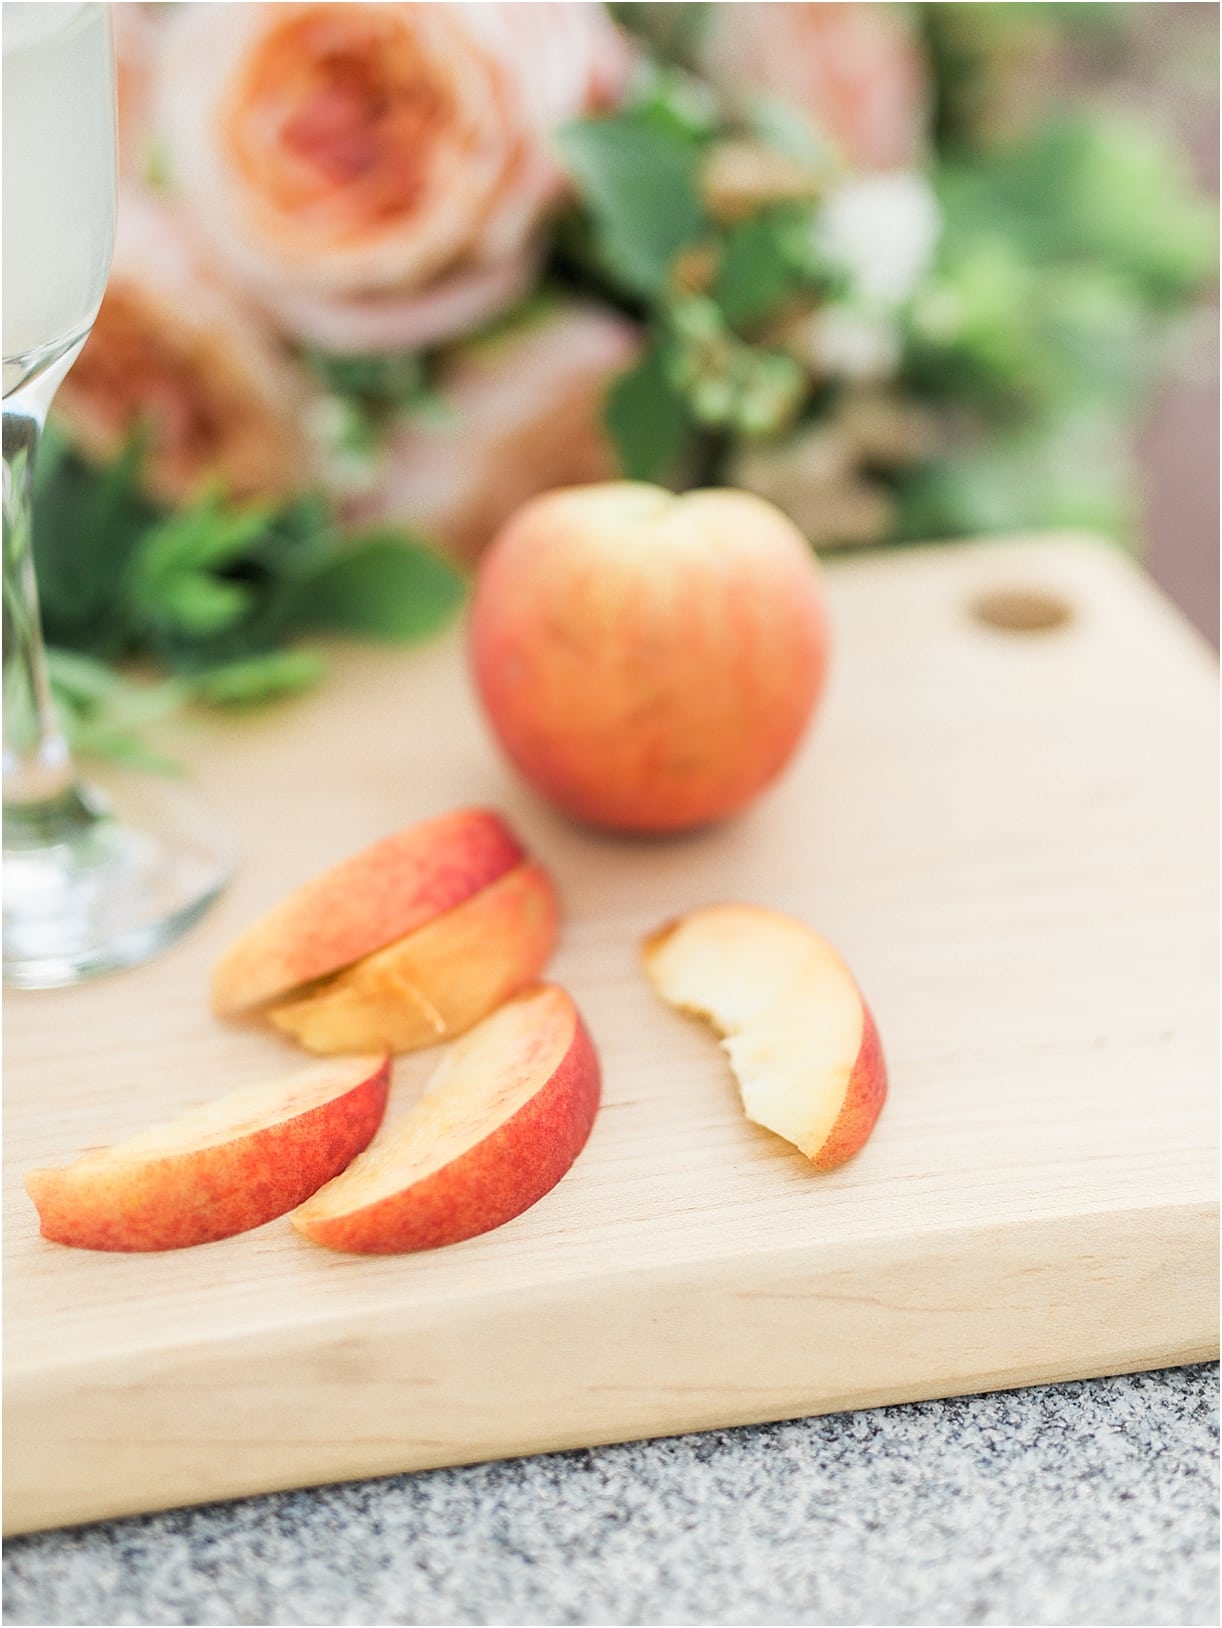 Peach Inspired Wedding Inspiration at the Arboretum Slices Sliced